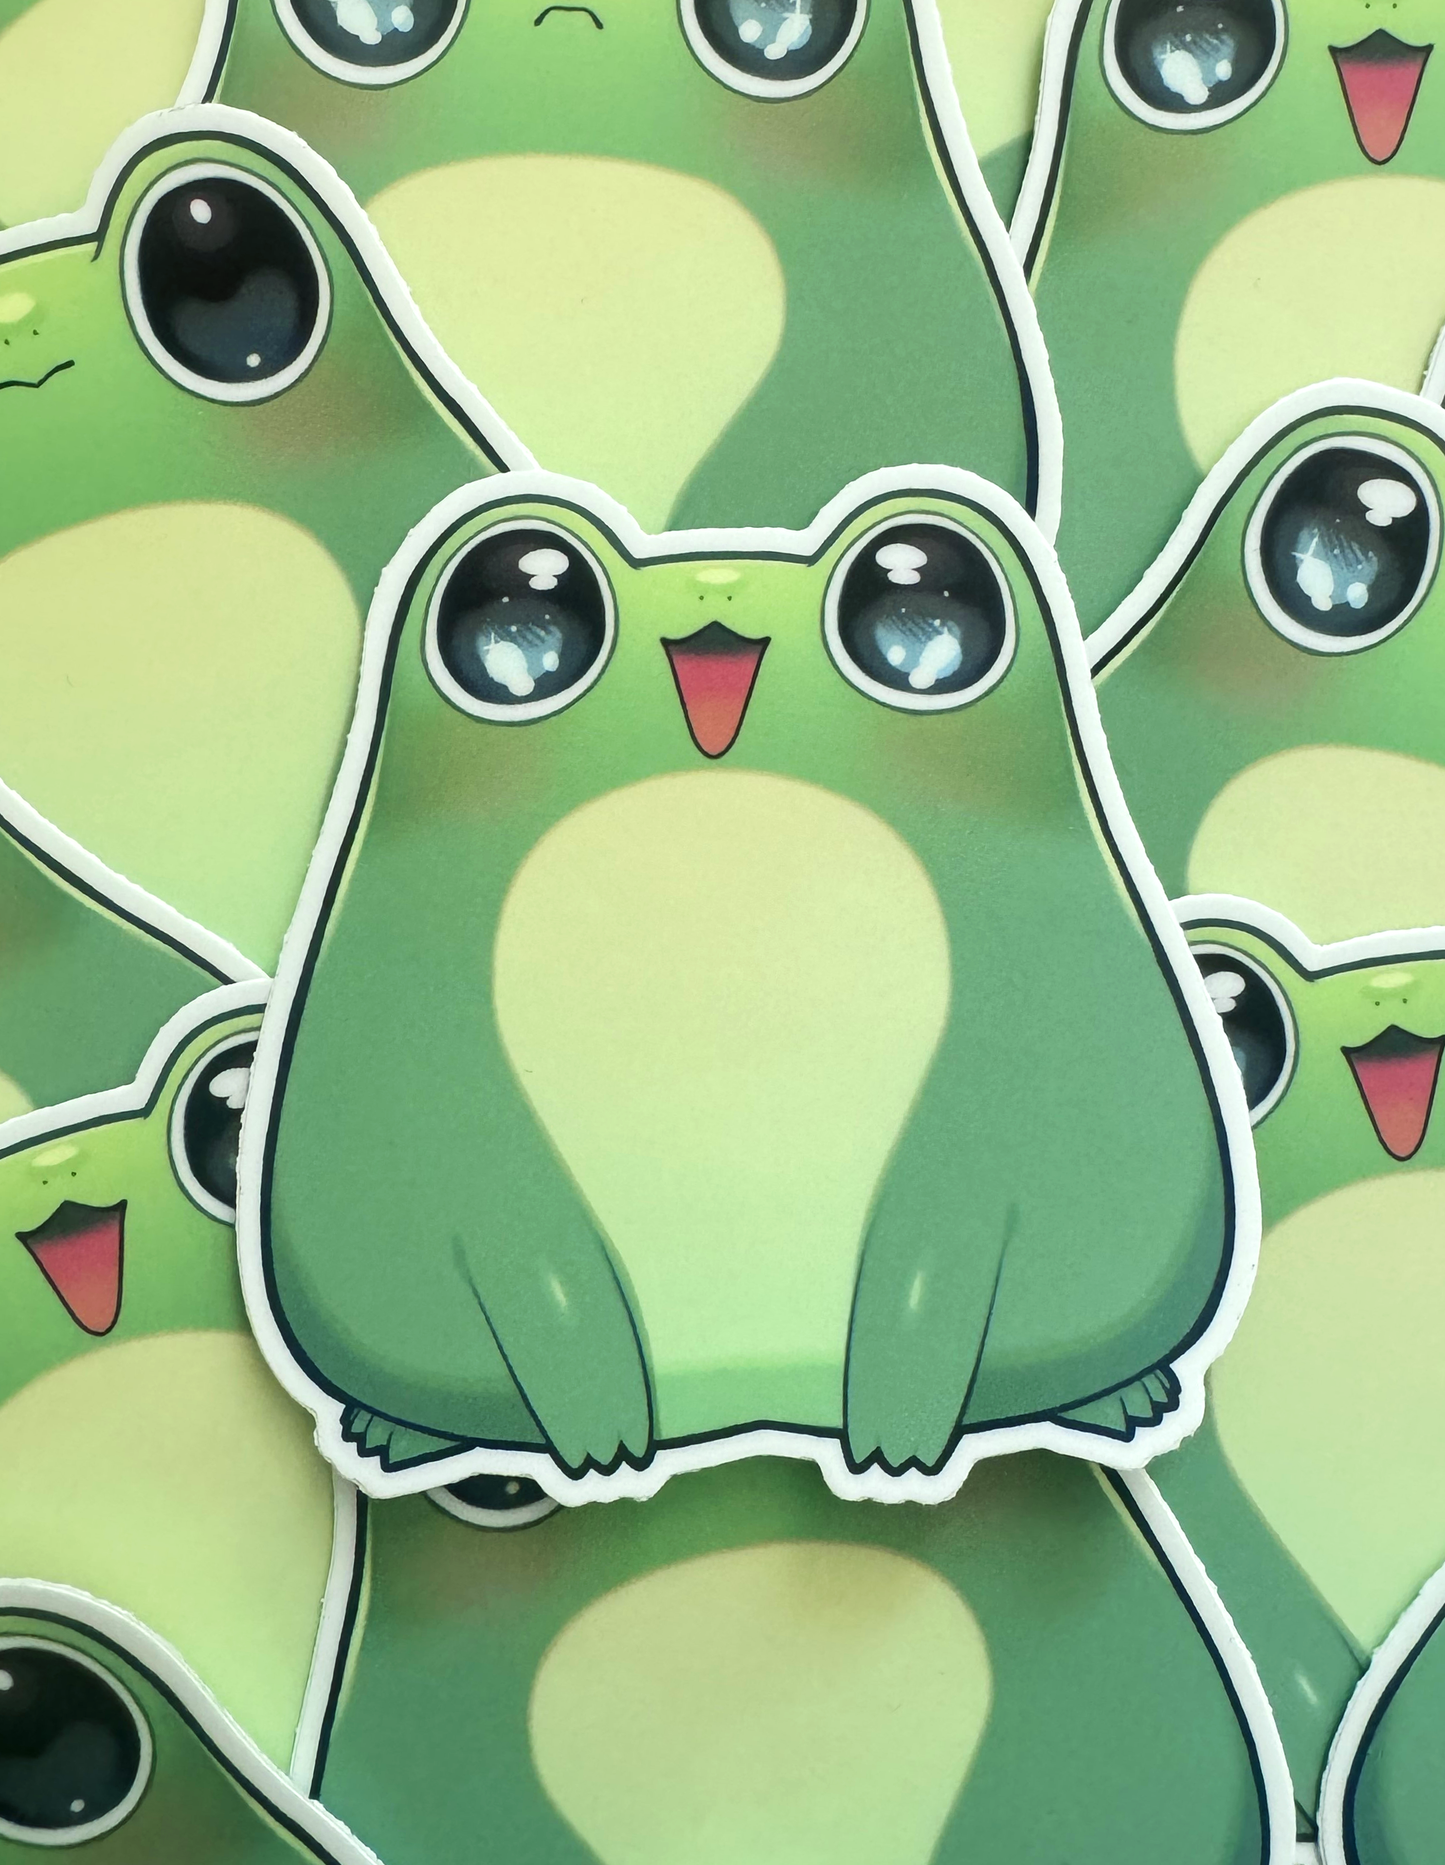 Pog the Frog Stickers